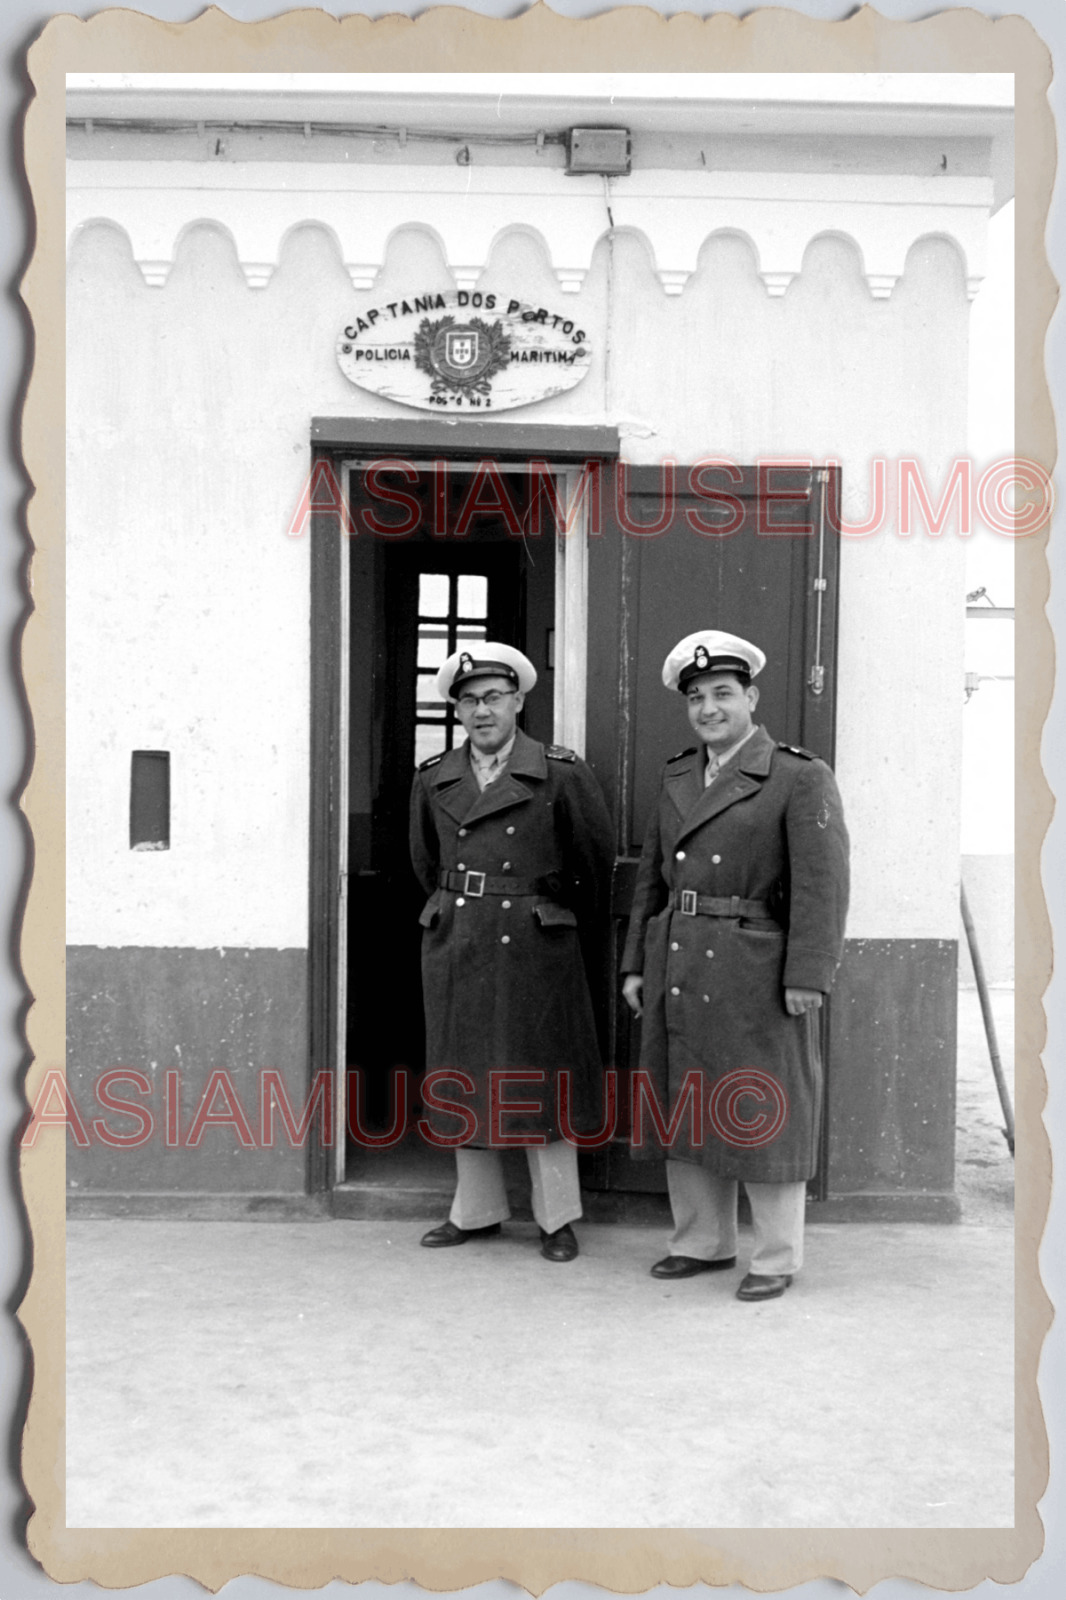 40s MACAU MACAO PORTUGUESE COLONY OFFICER MILITARY MAN Vintage Photo 澳门旧照片 27720